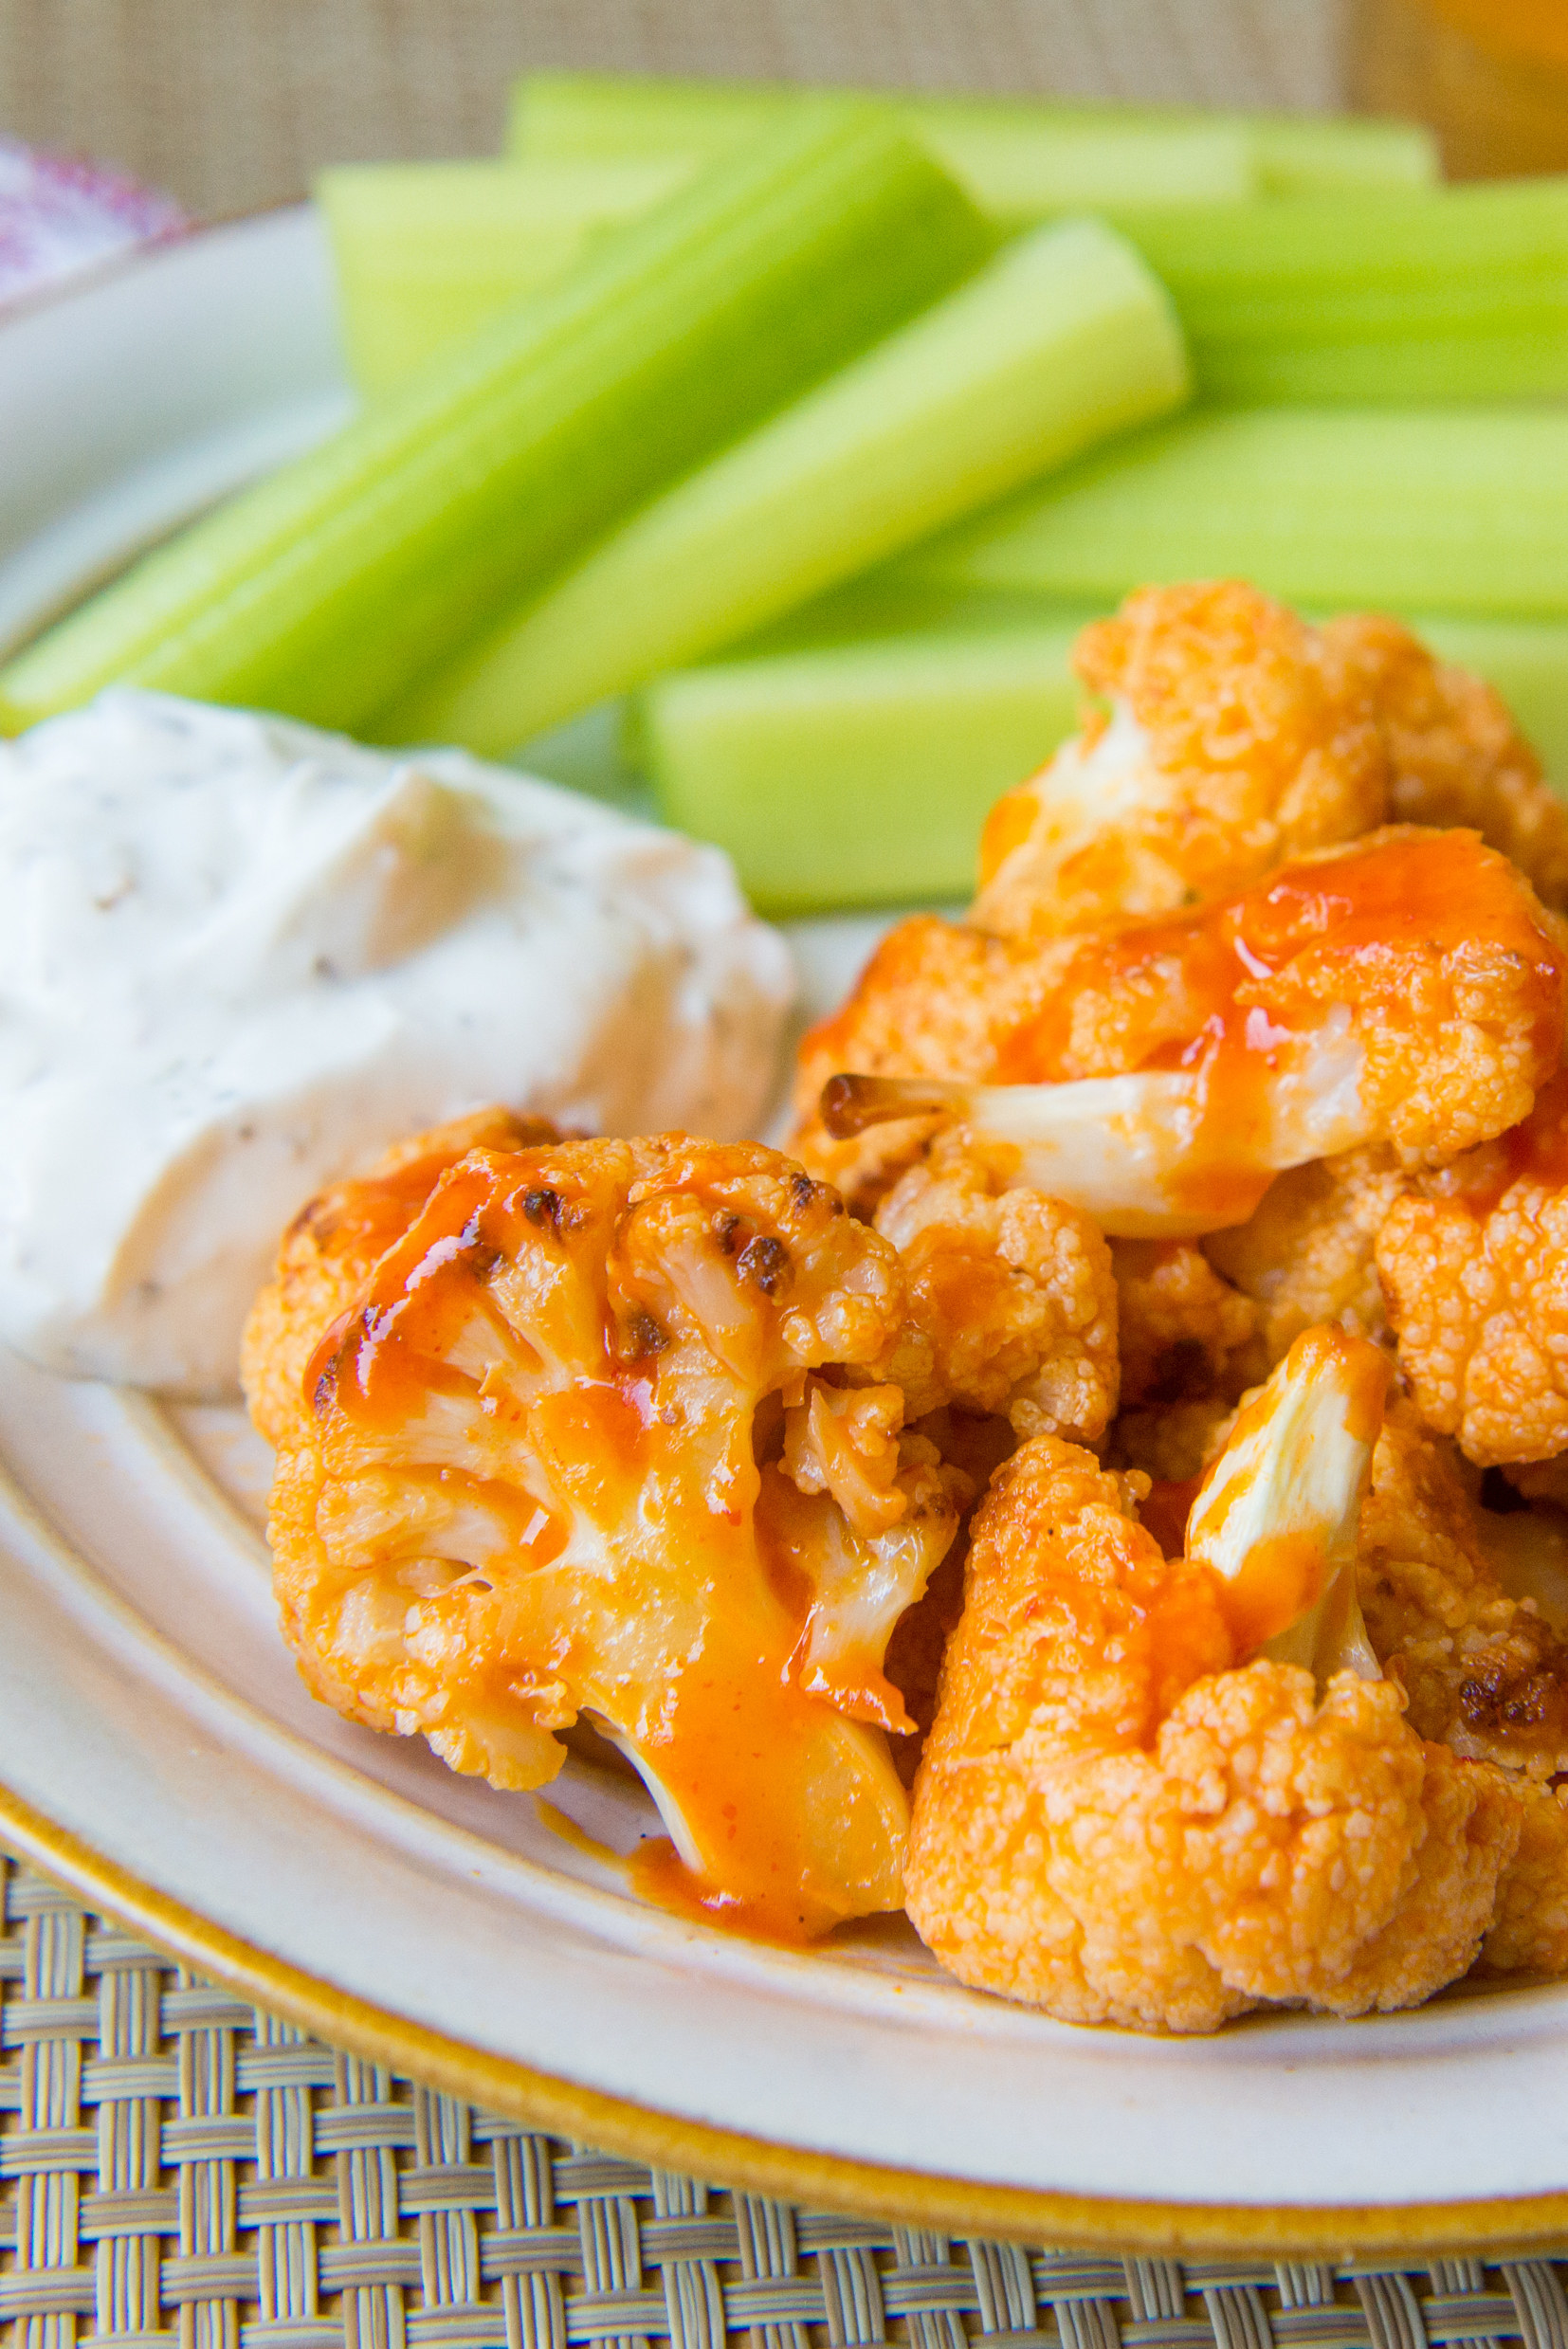 Spicy Buffalo cauliflower bites with dip and celery.